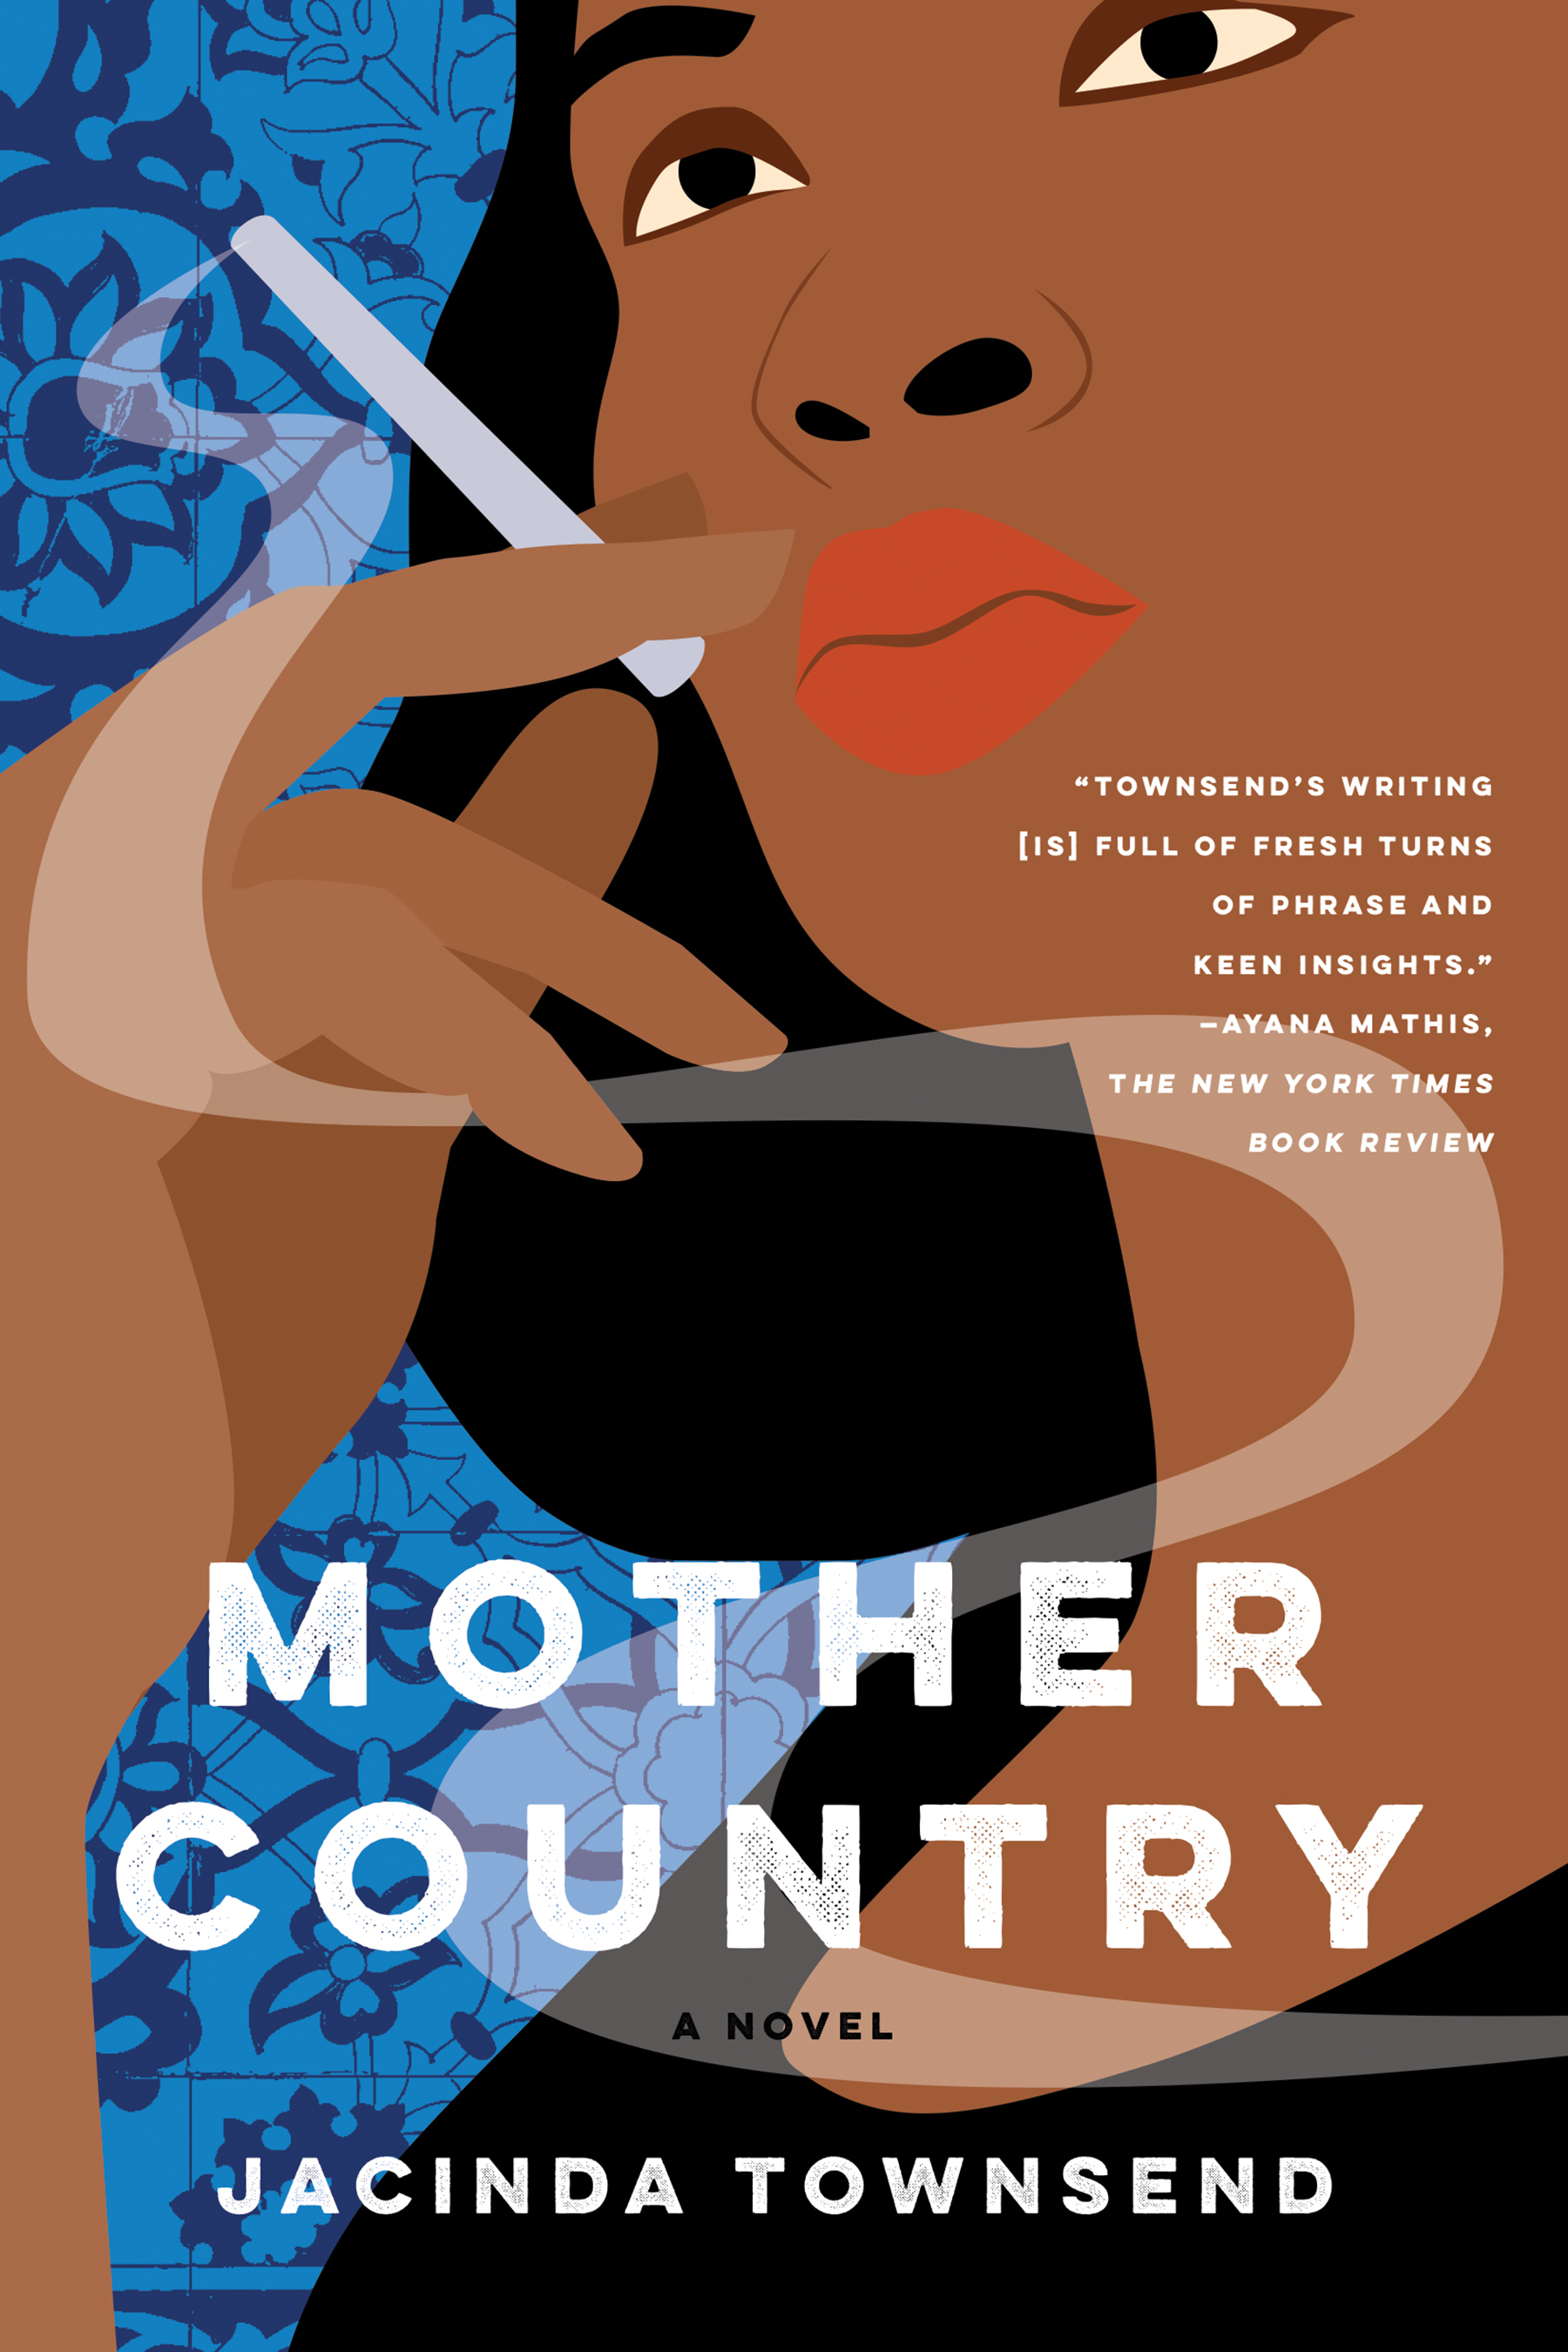 Mother Country: A Novel by Jacinda Townsend